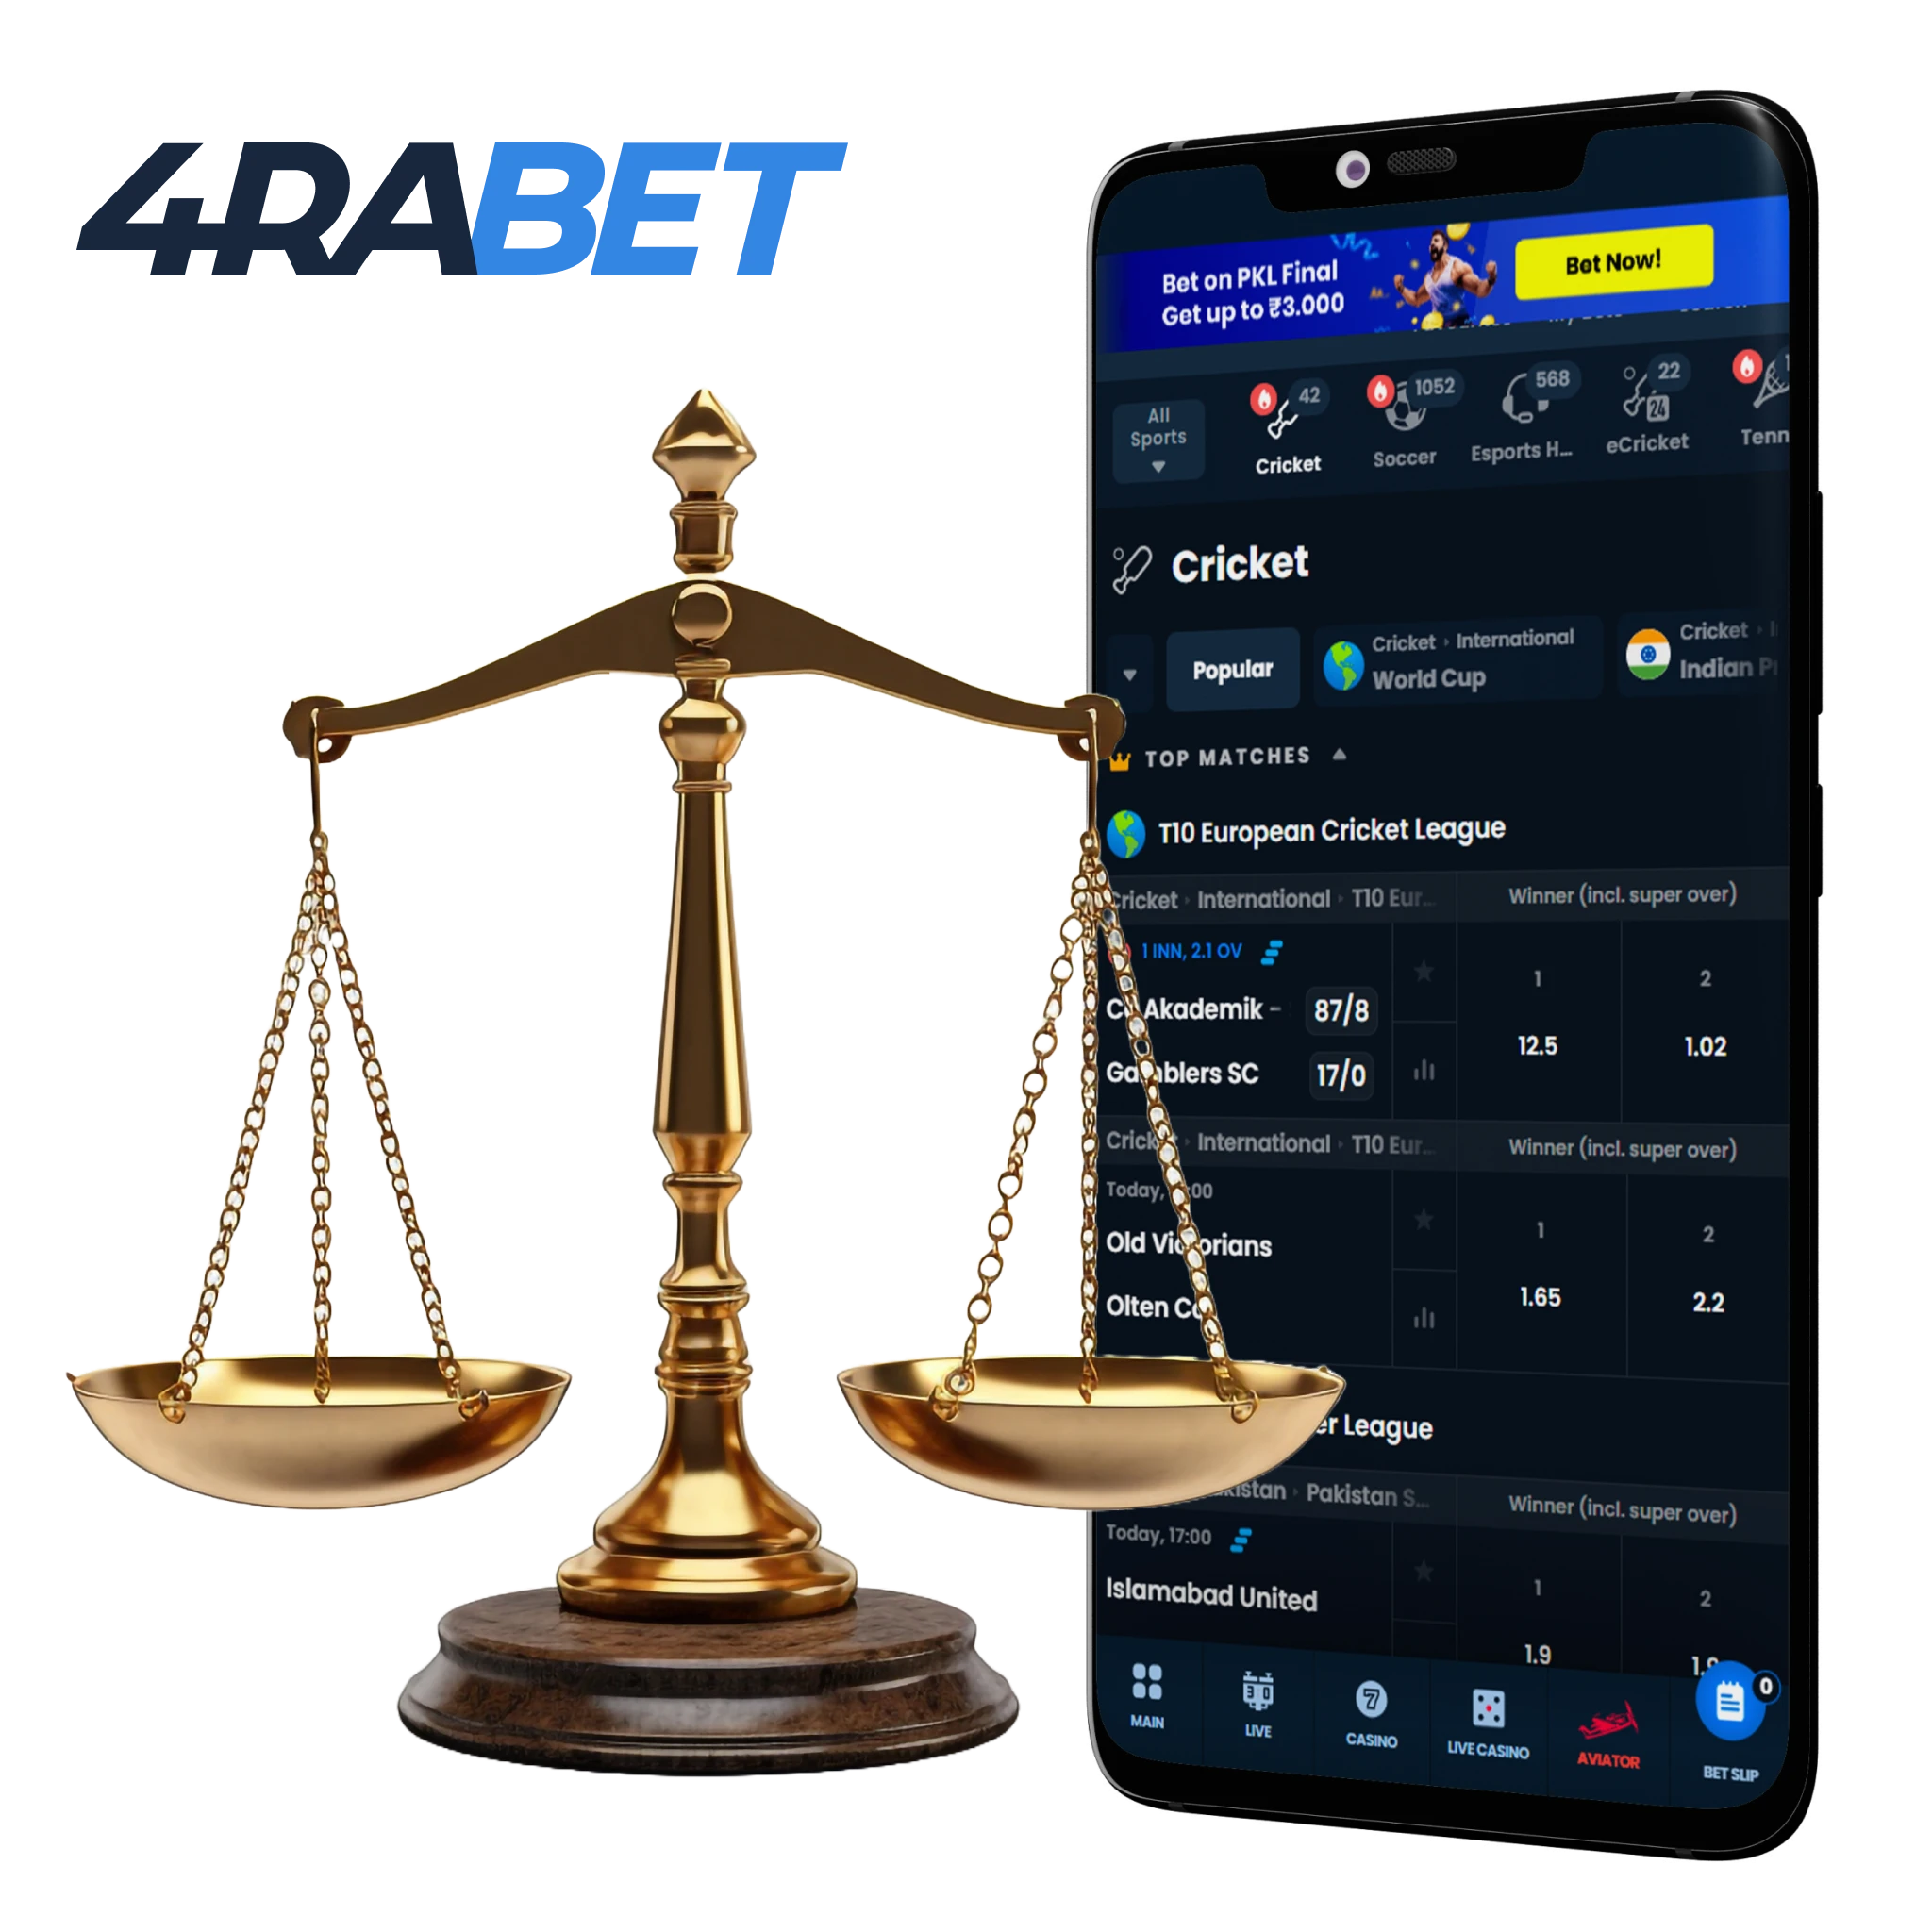 4rabet app has an exclusive design for legal betting on cricket.